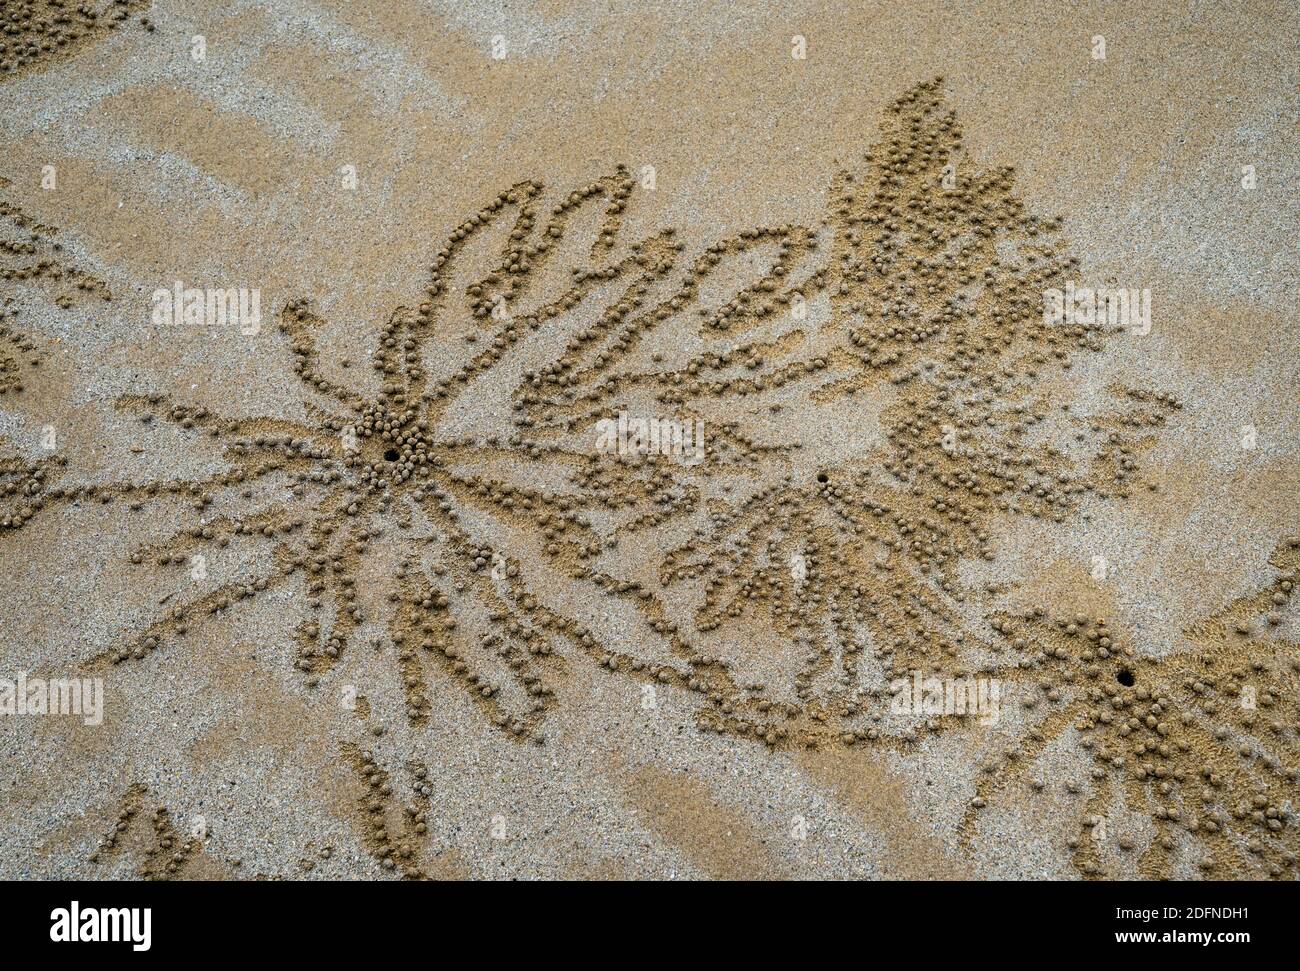 intriguing patterns of sand ball art work by Sand bubbler crabs on Mission Beach, Clump Point, Cassowary Coast Region, Queensland, Australia Stock Photo